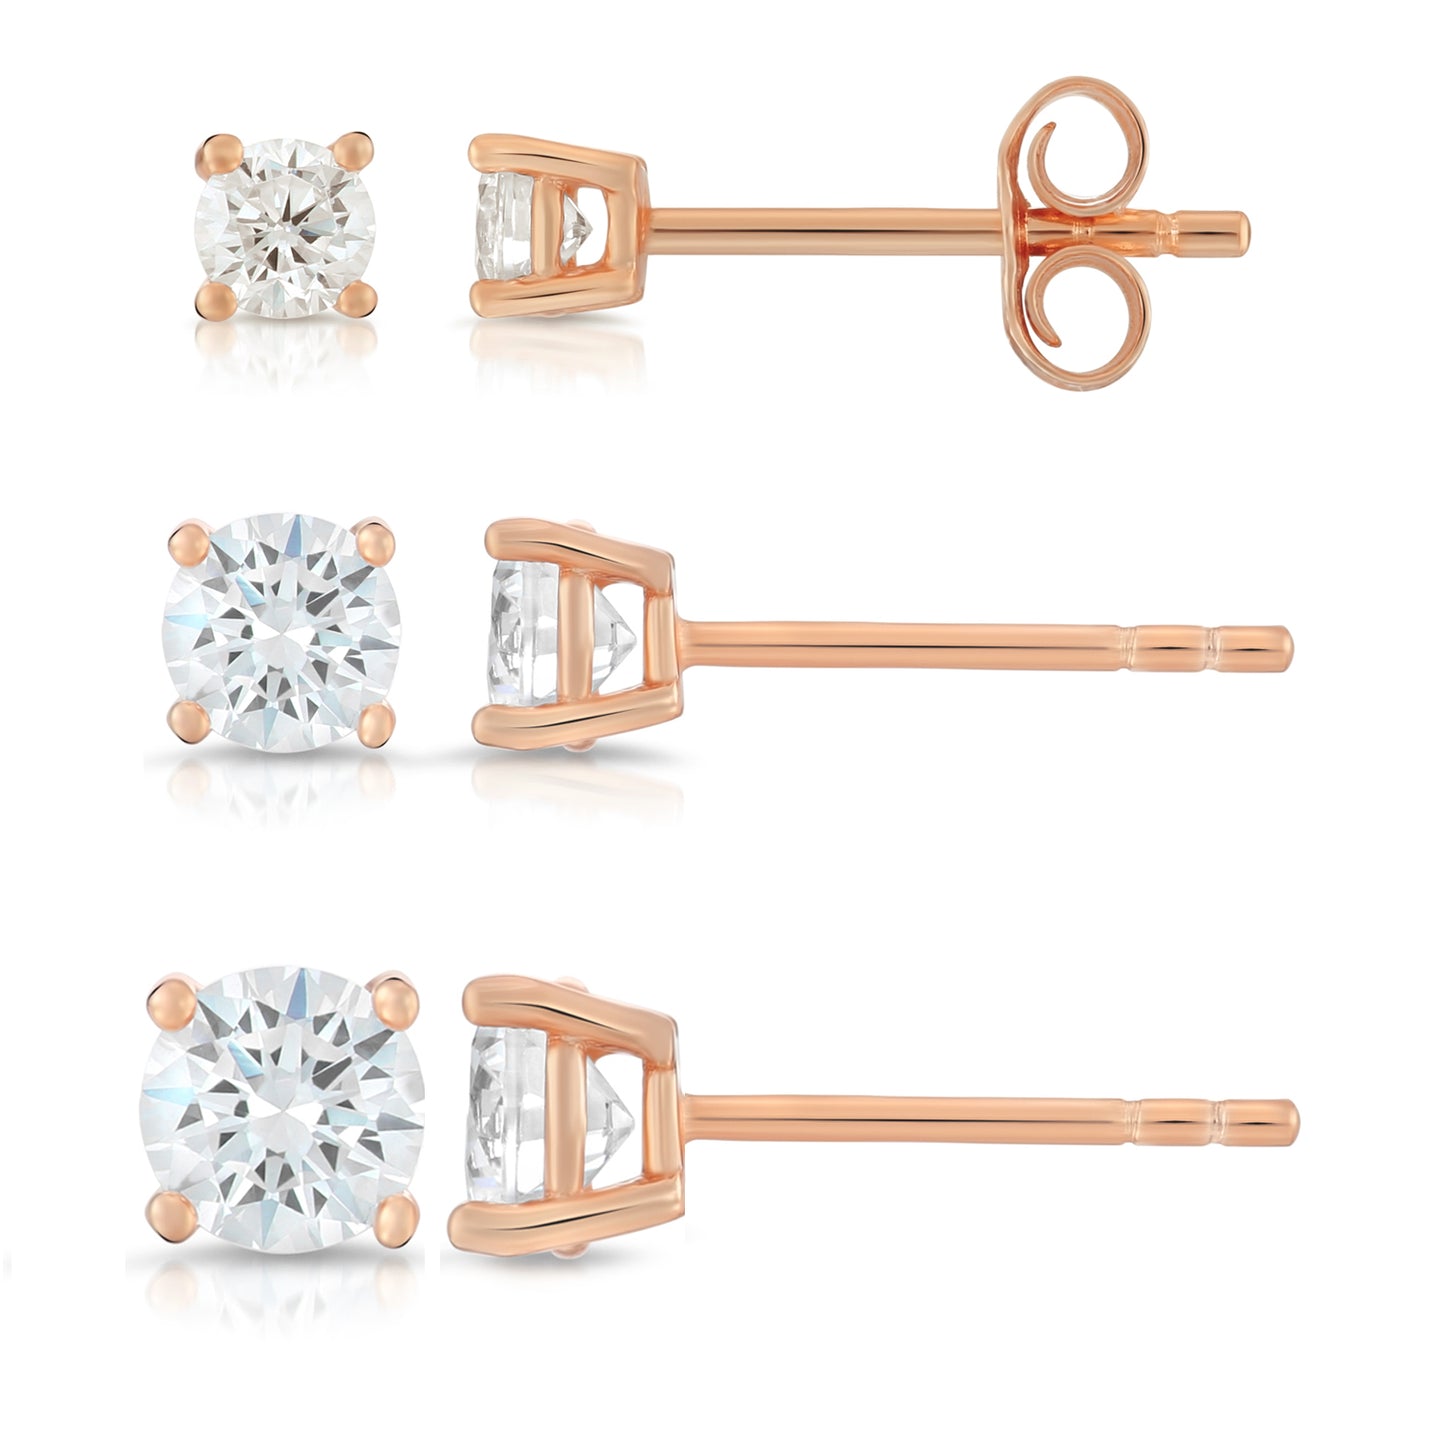 Pure Sterling Silver Stud Earrings, Rose Gold Plated